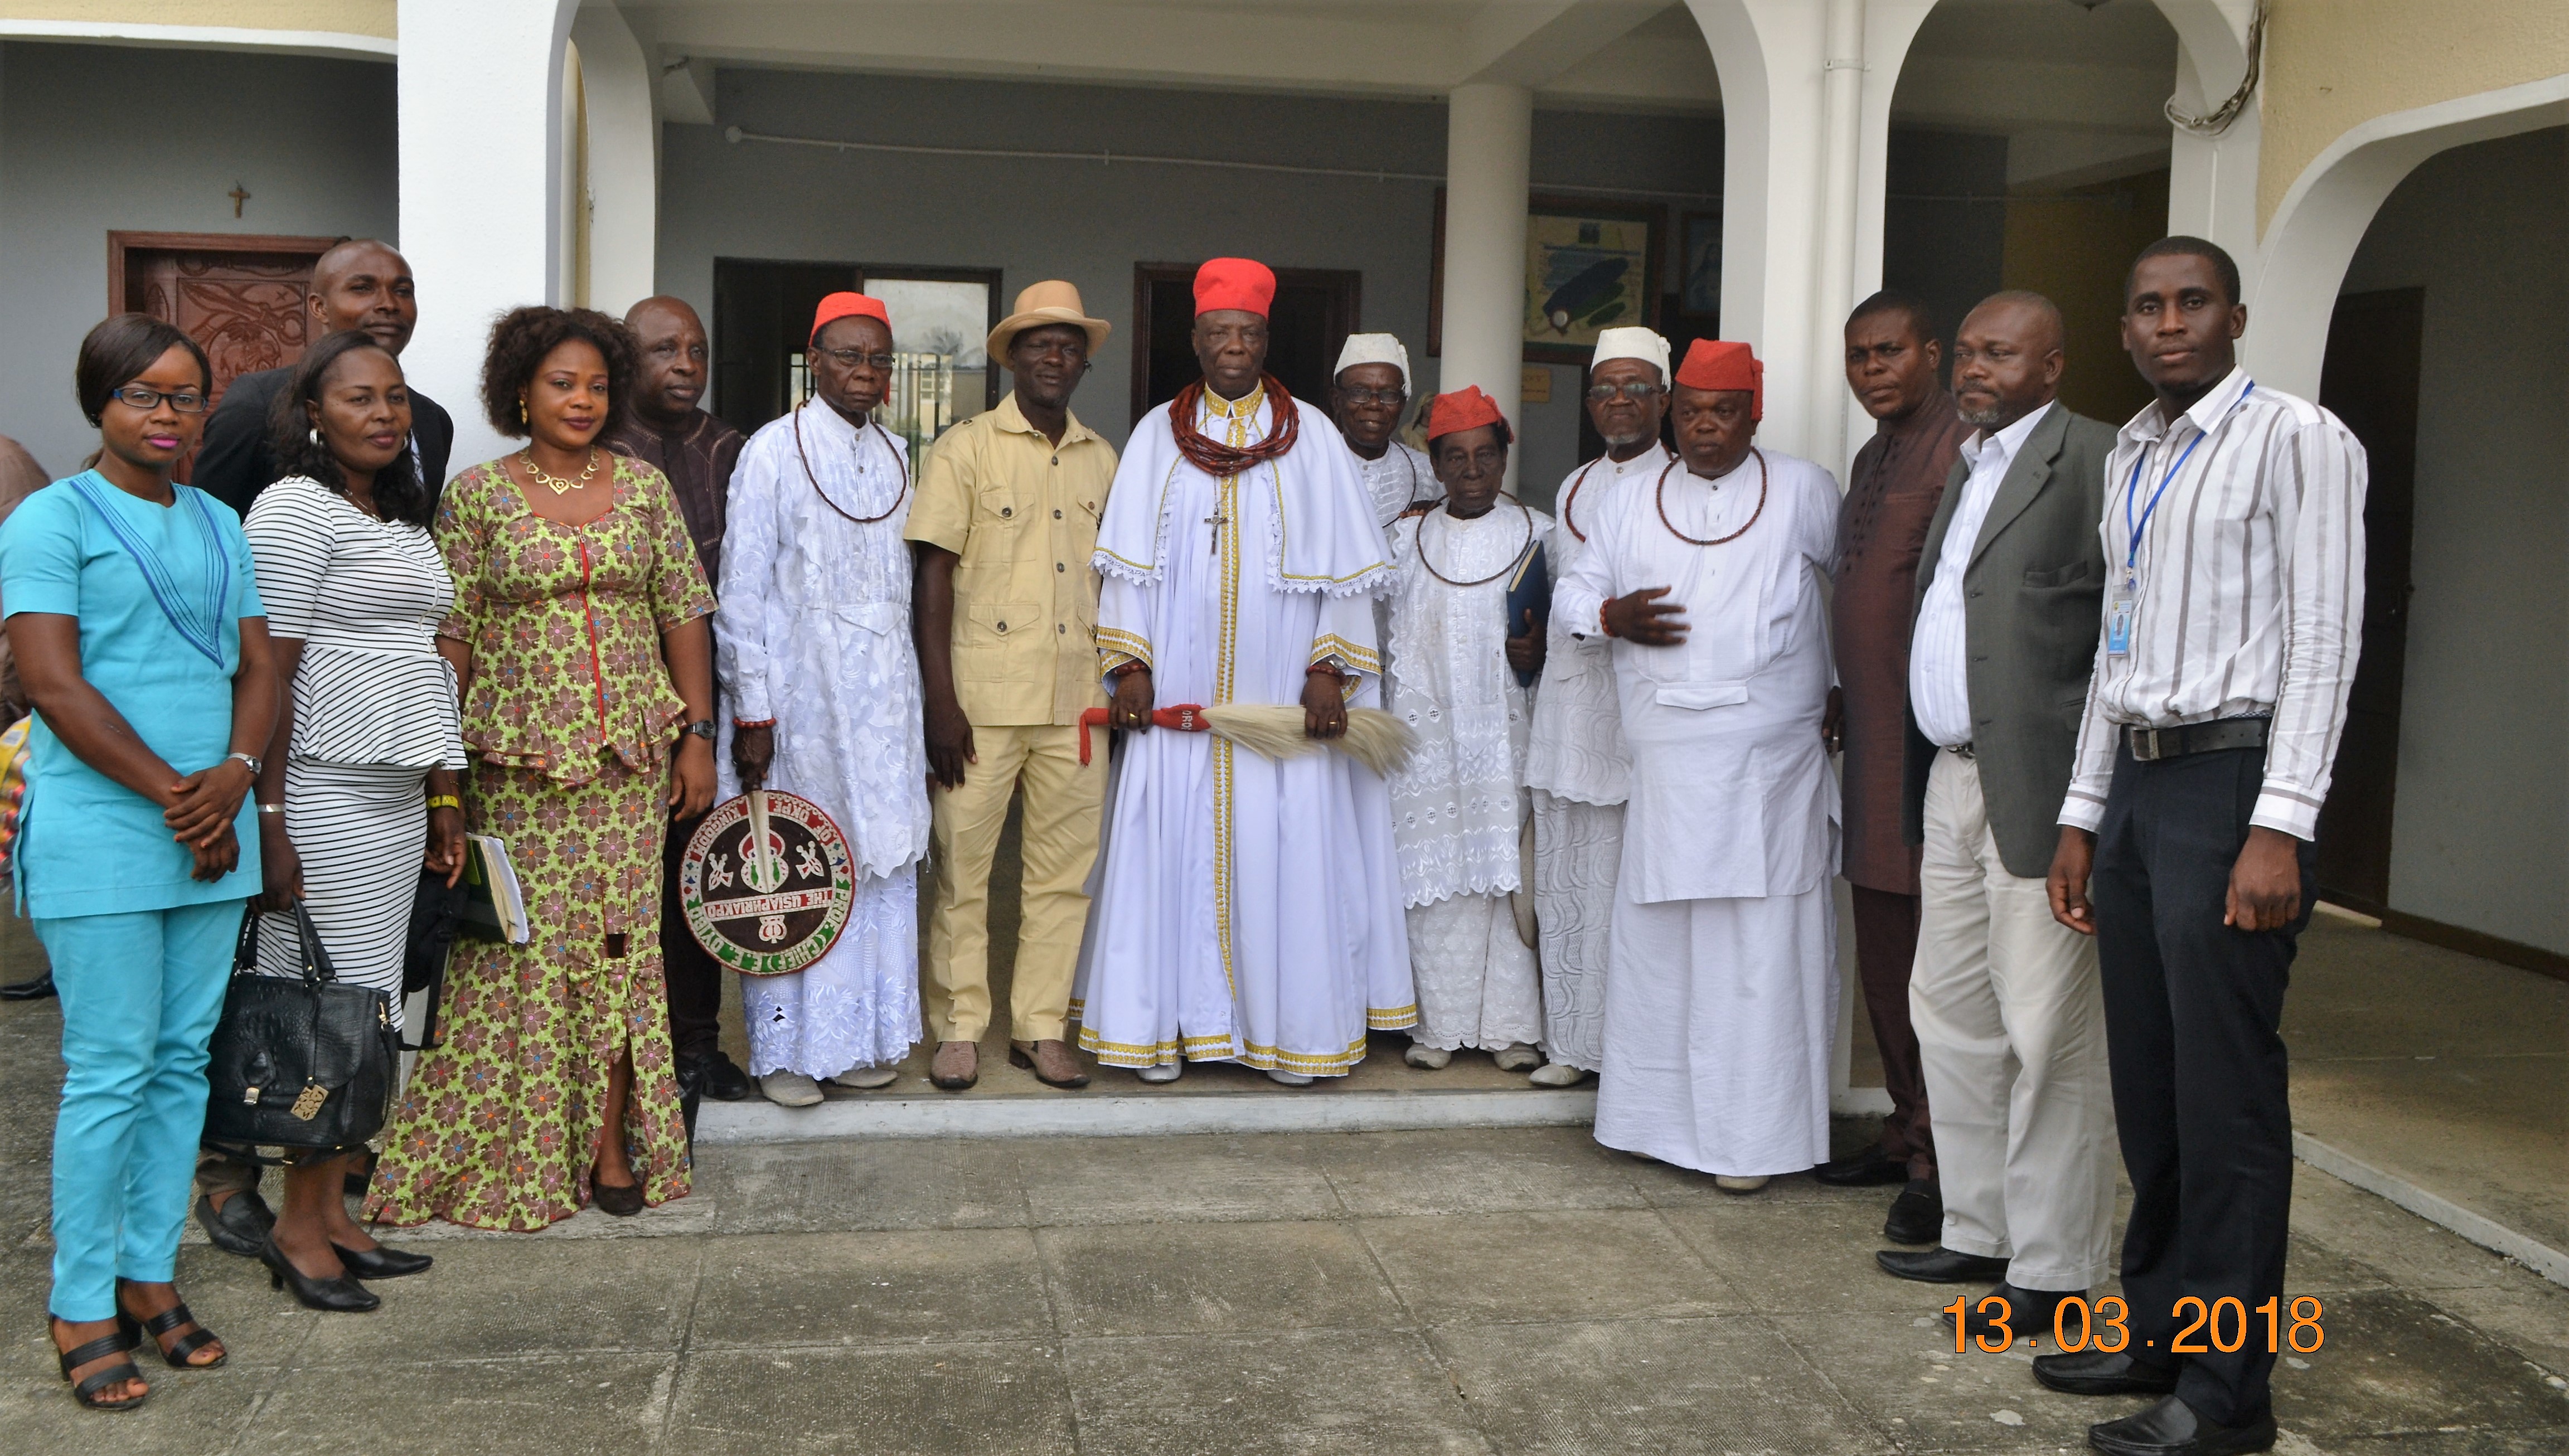 Replicate your conflict resolution professionalism in Okpe, Monarch tells CEPEJ